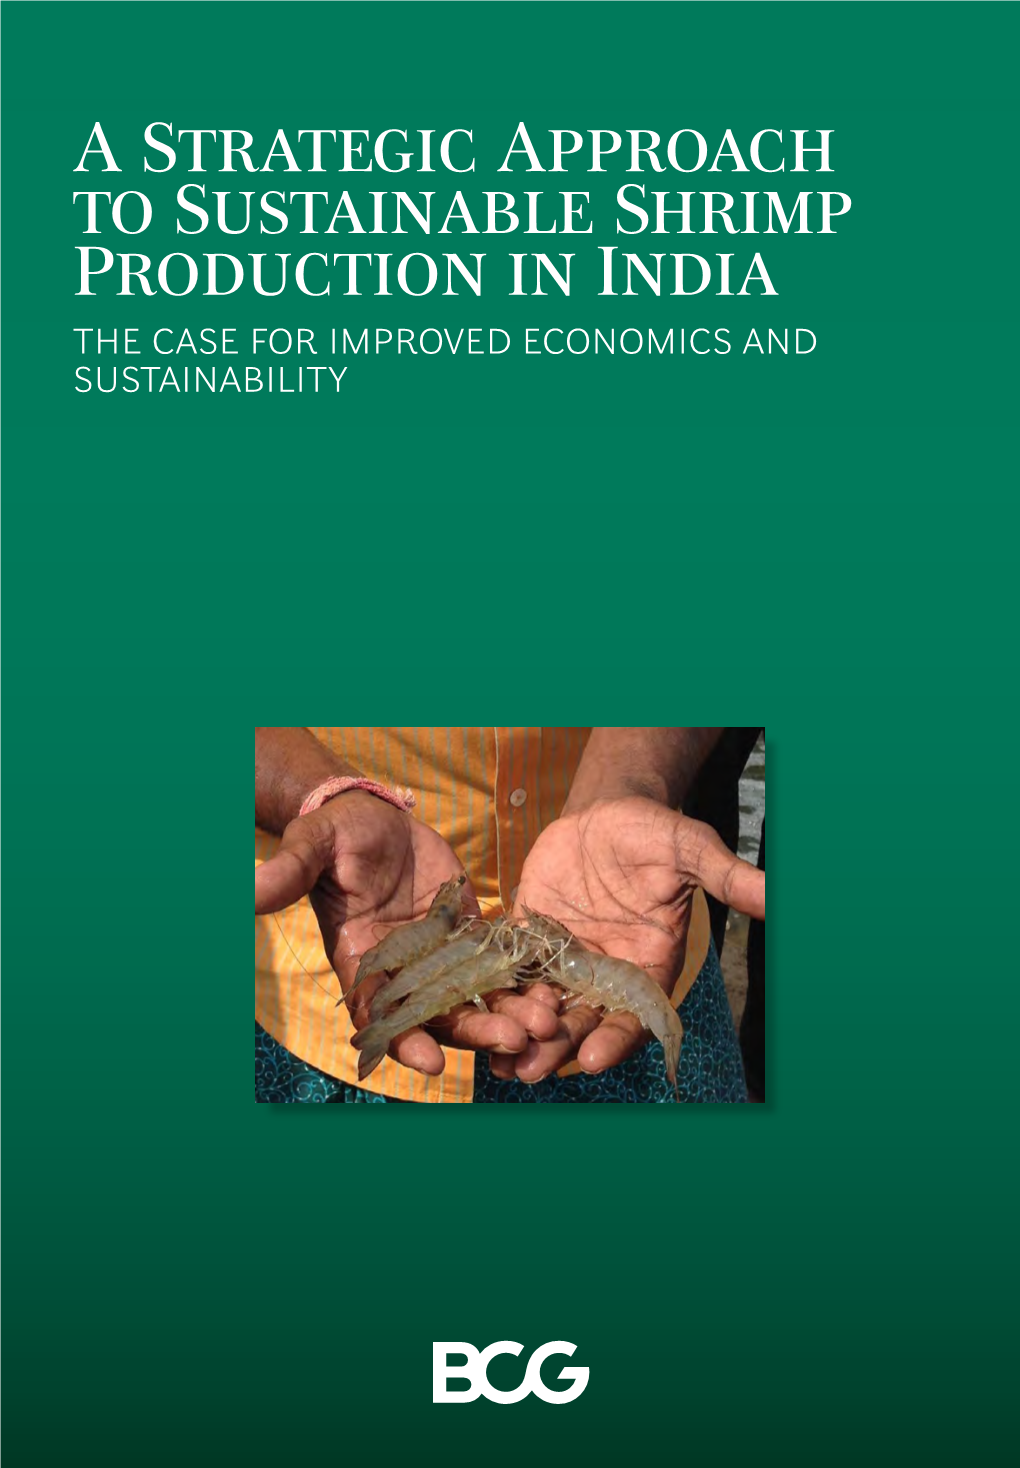 A Strategic Approach to Sustainable Shrimp Production in India